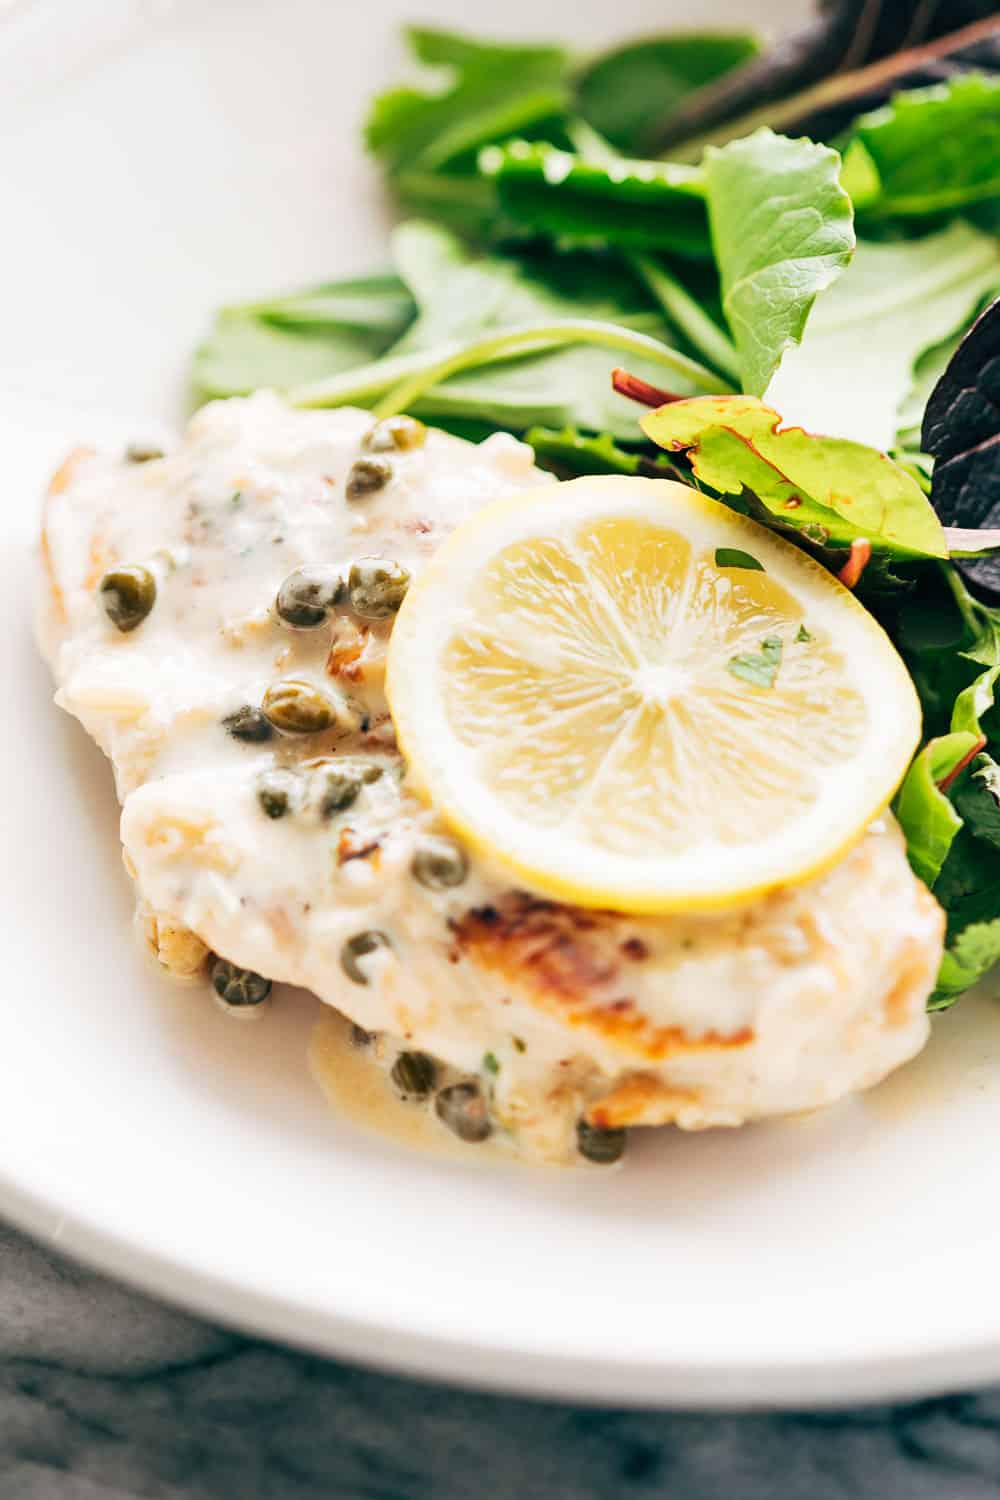 Creamy lemon chicken scallopini served with a light salad on the side in a white bowl